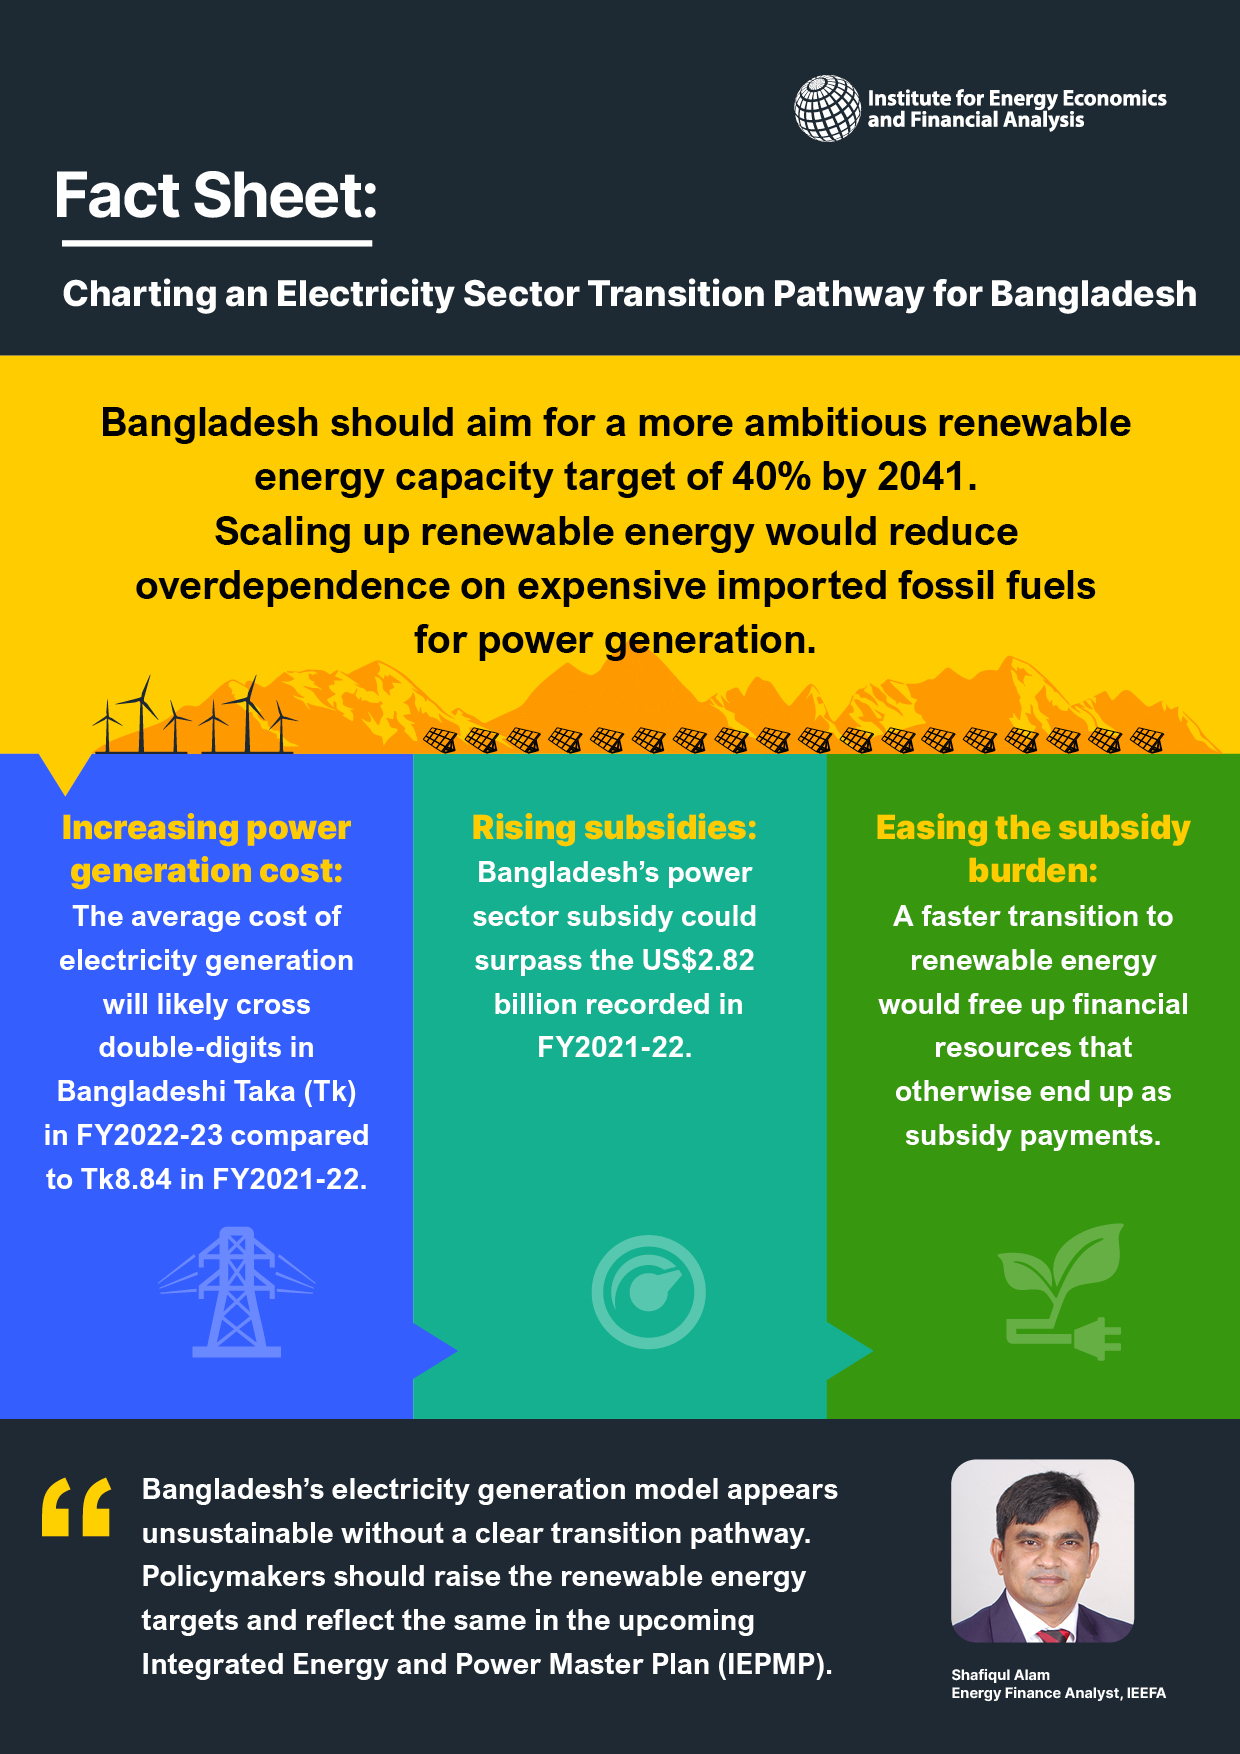 Charting an electricity sector transition pathway for Bangladesh